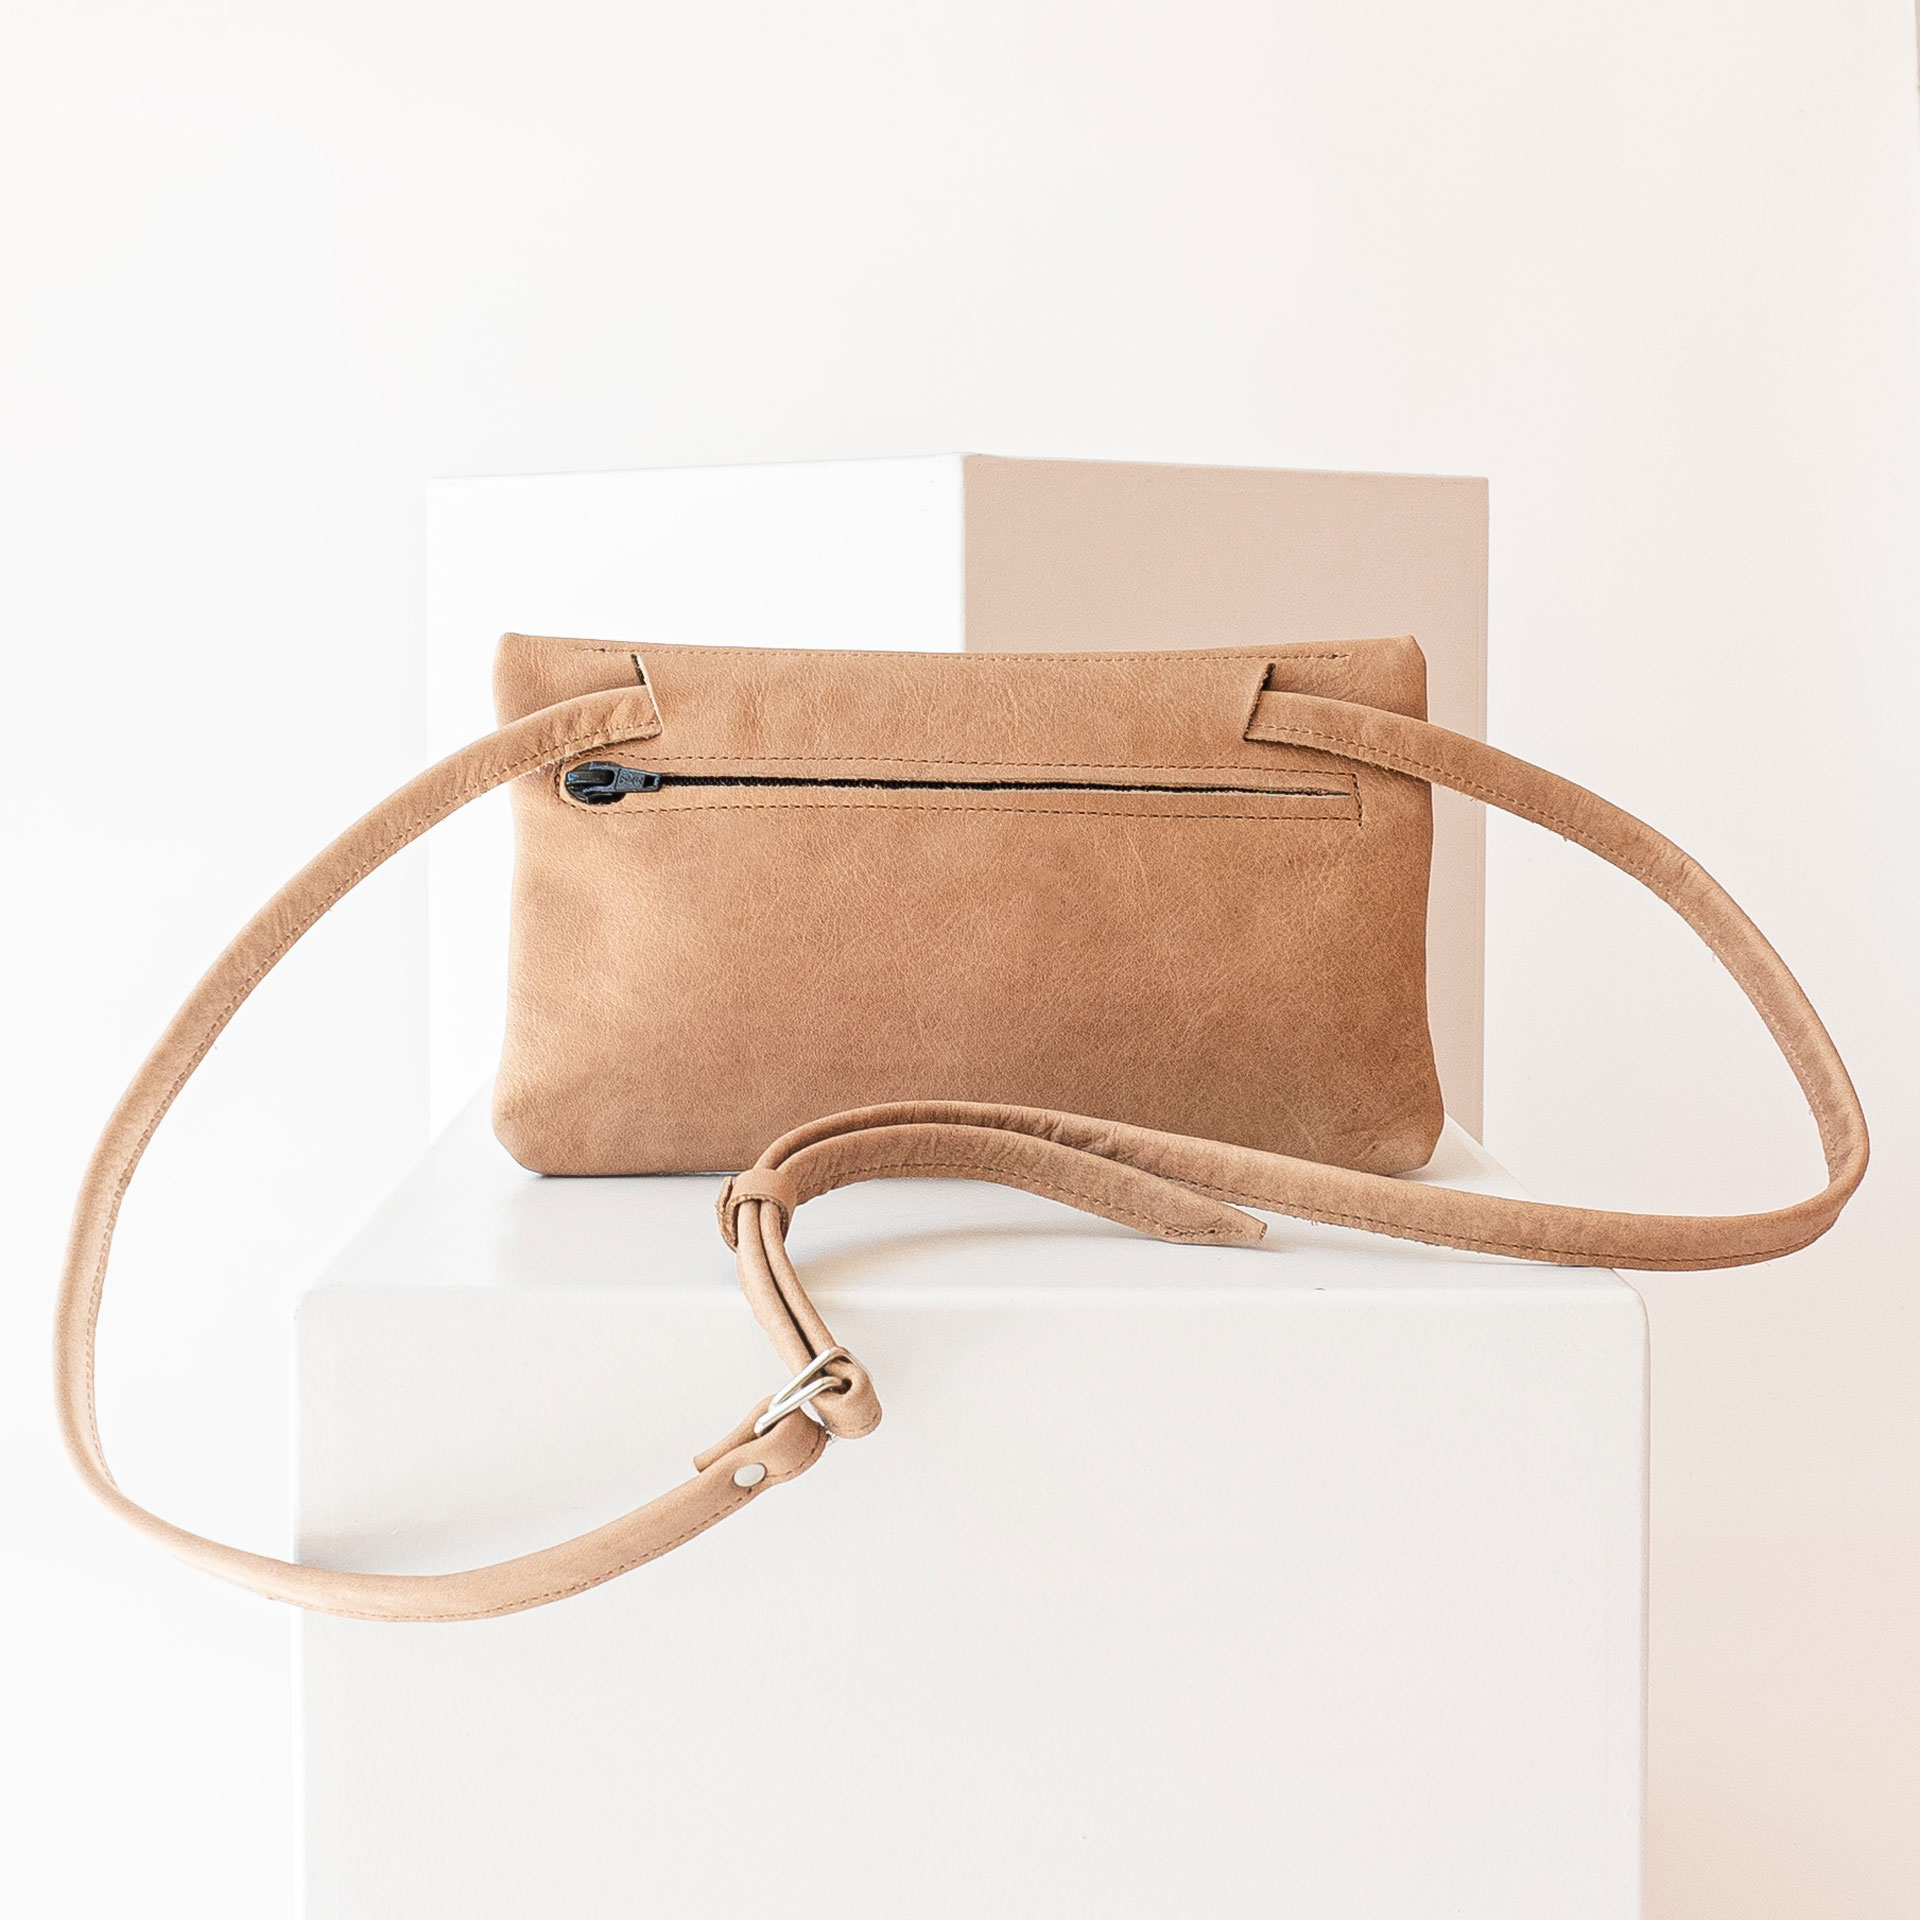 Back of the shoulder bag ISA made of natural leather in light brown with adjustable strap